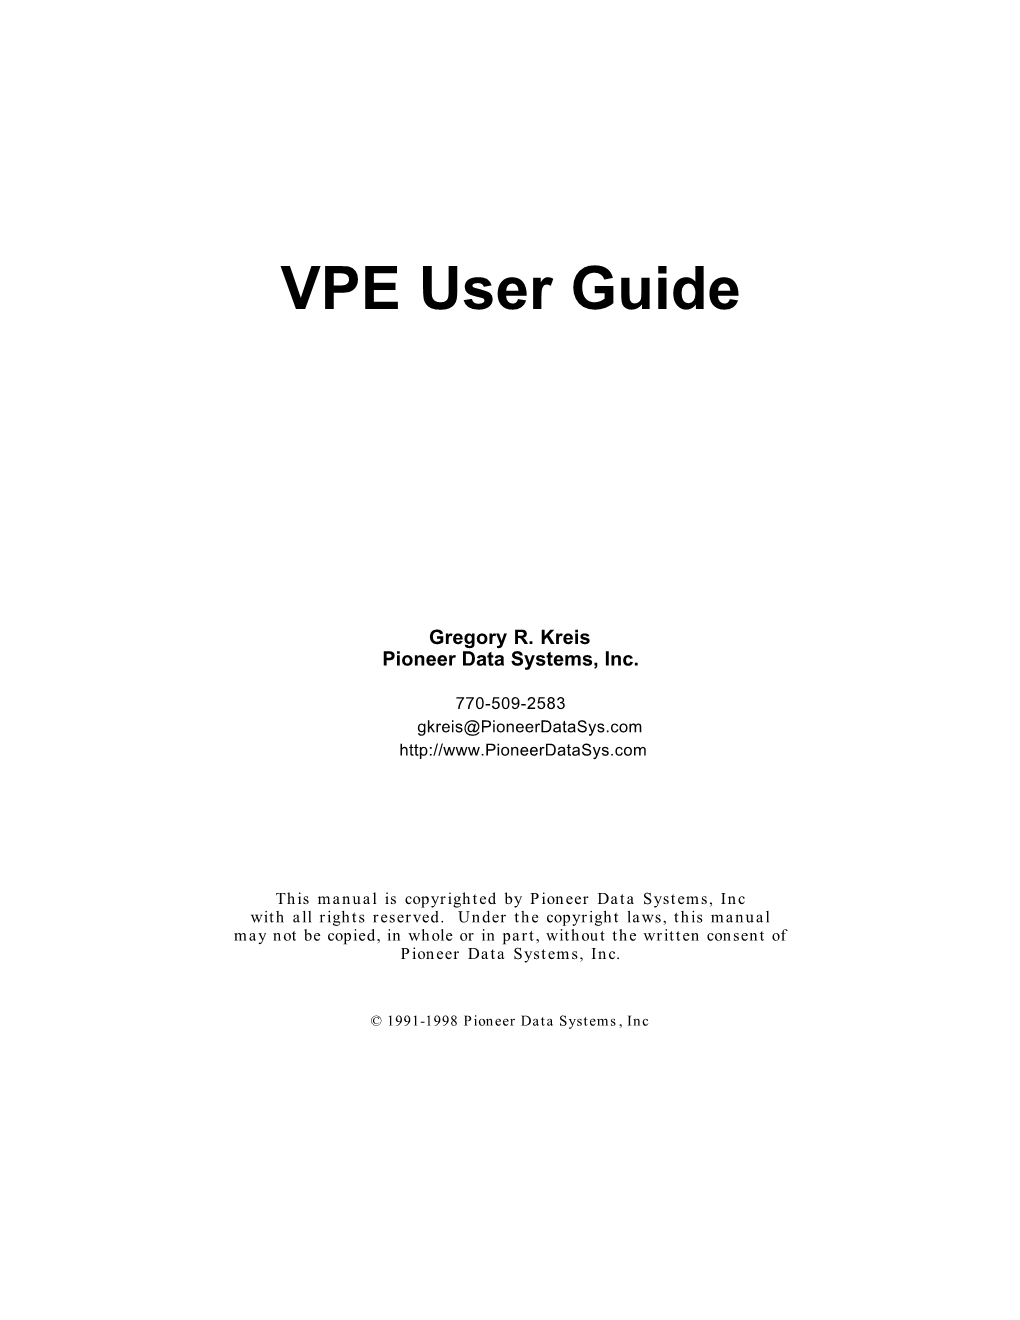 VPE User Guide